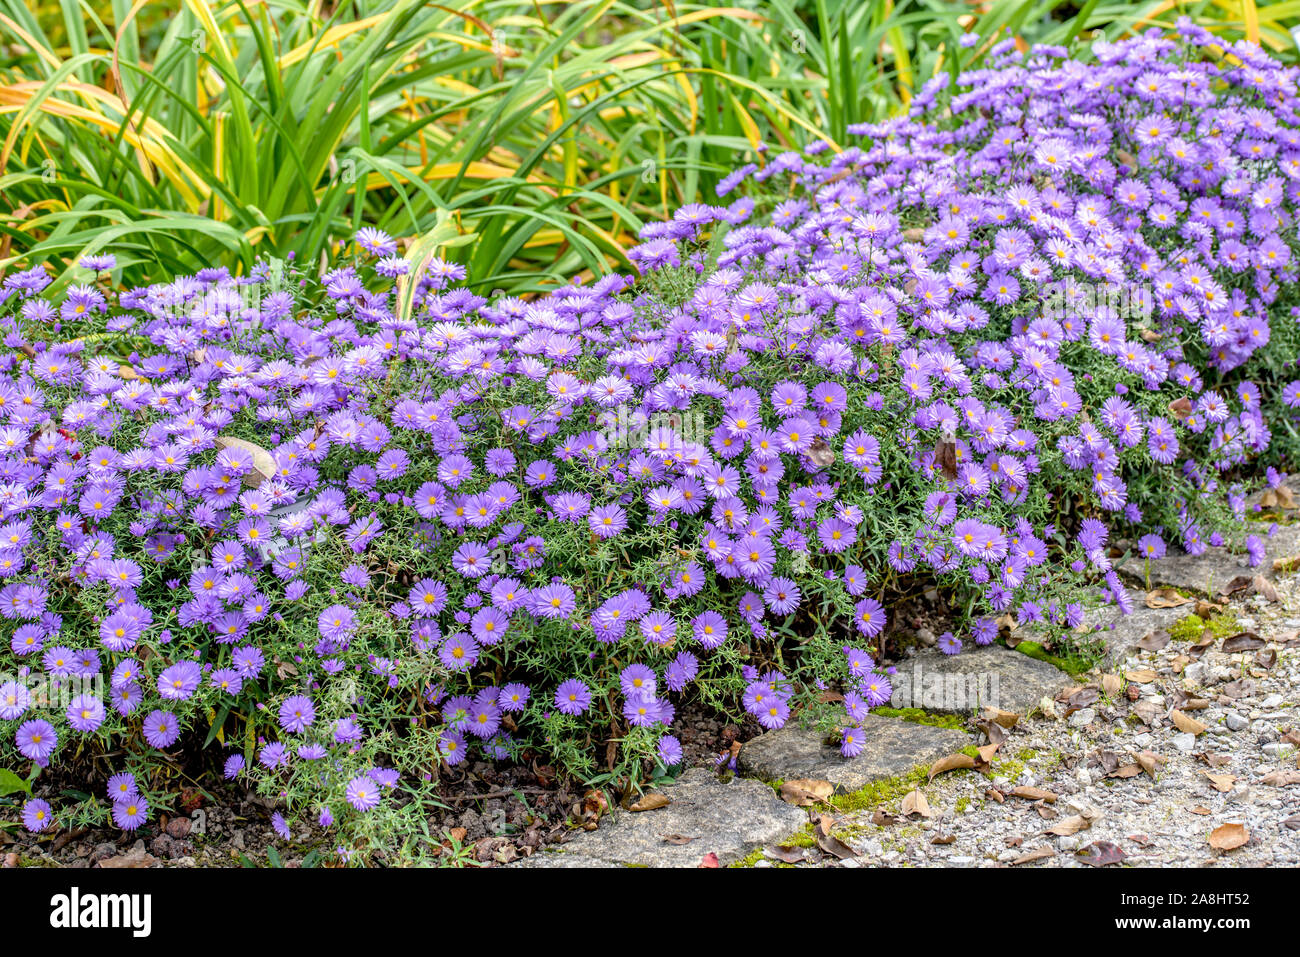 Kissen-Aster (Aster 'Lady in Blue') Stock Photo